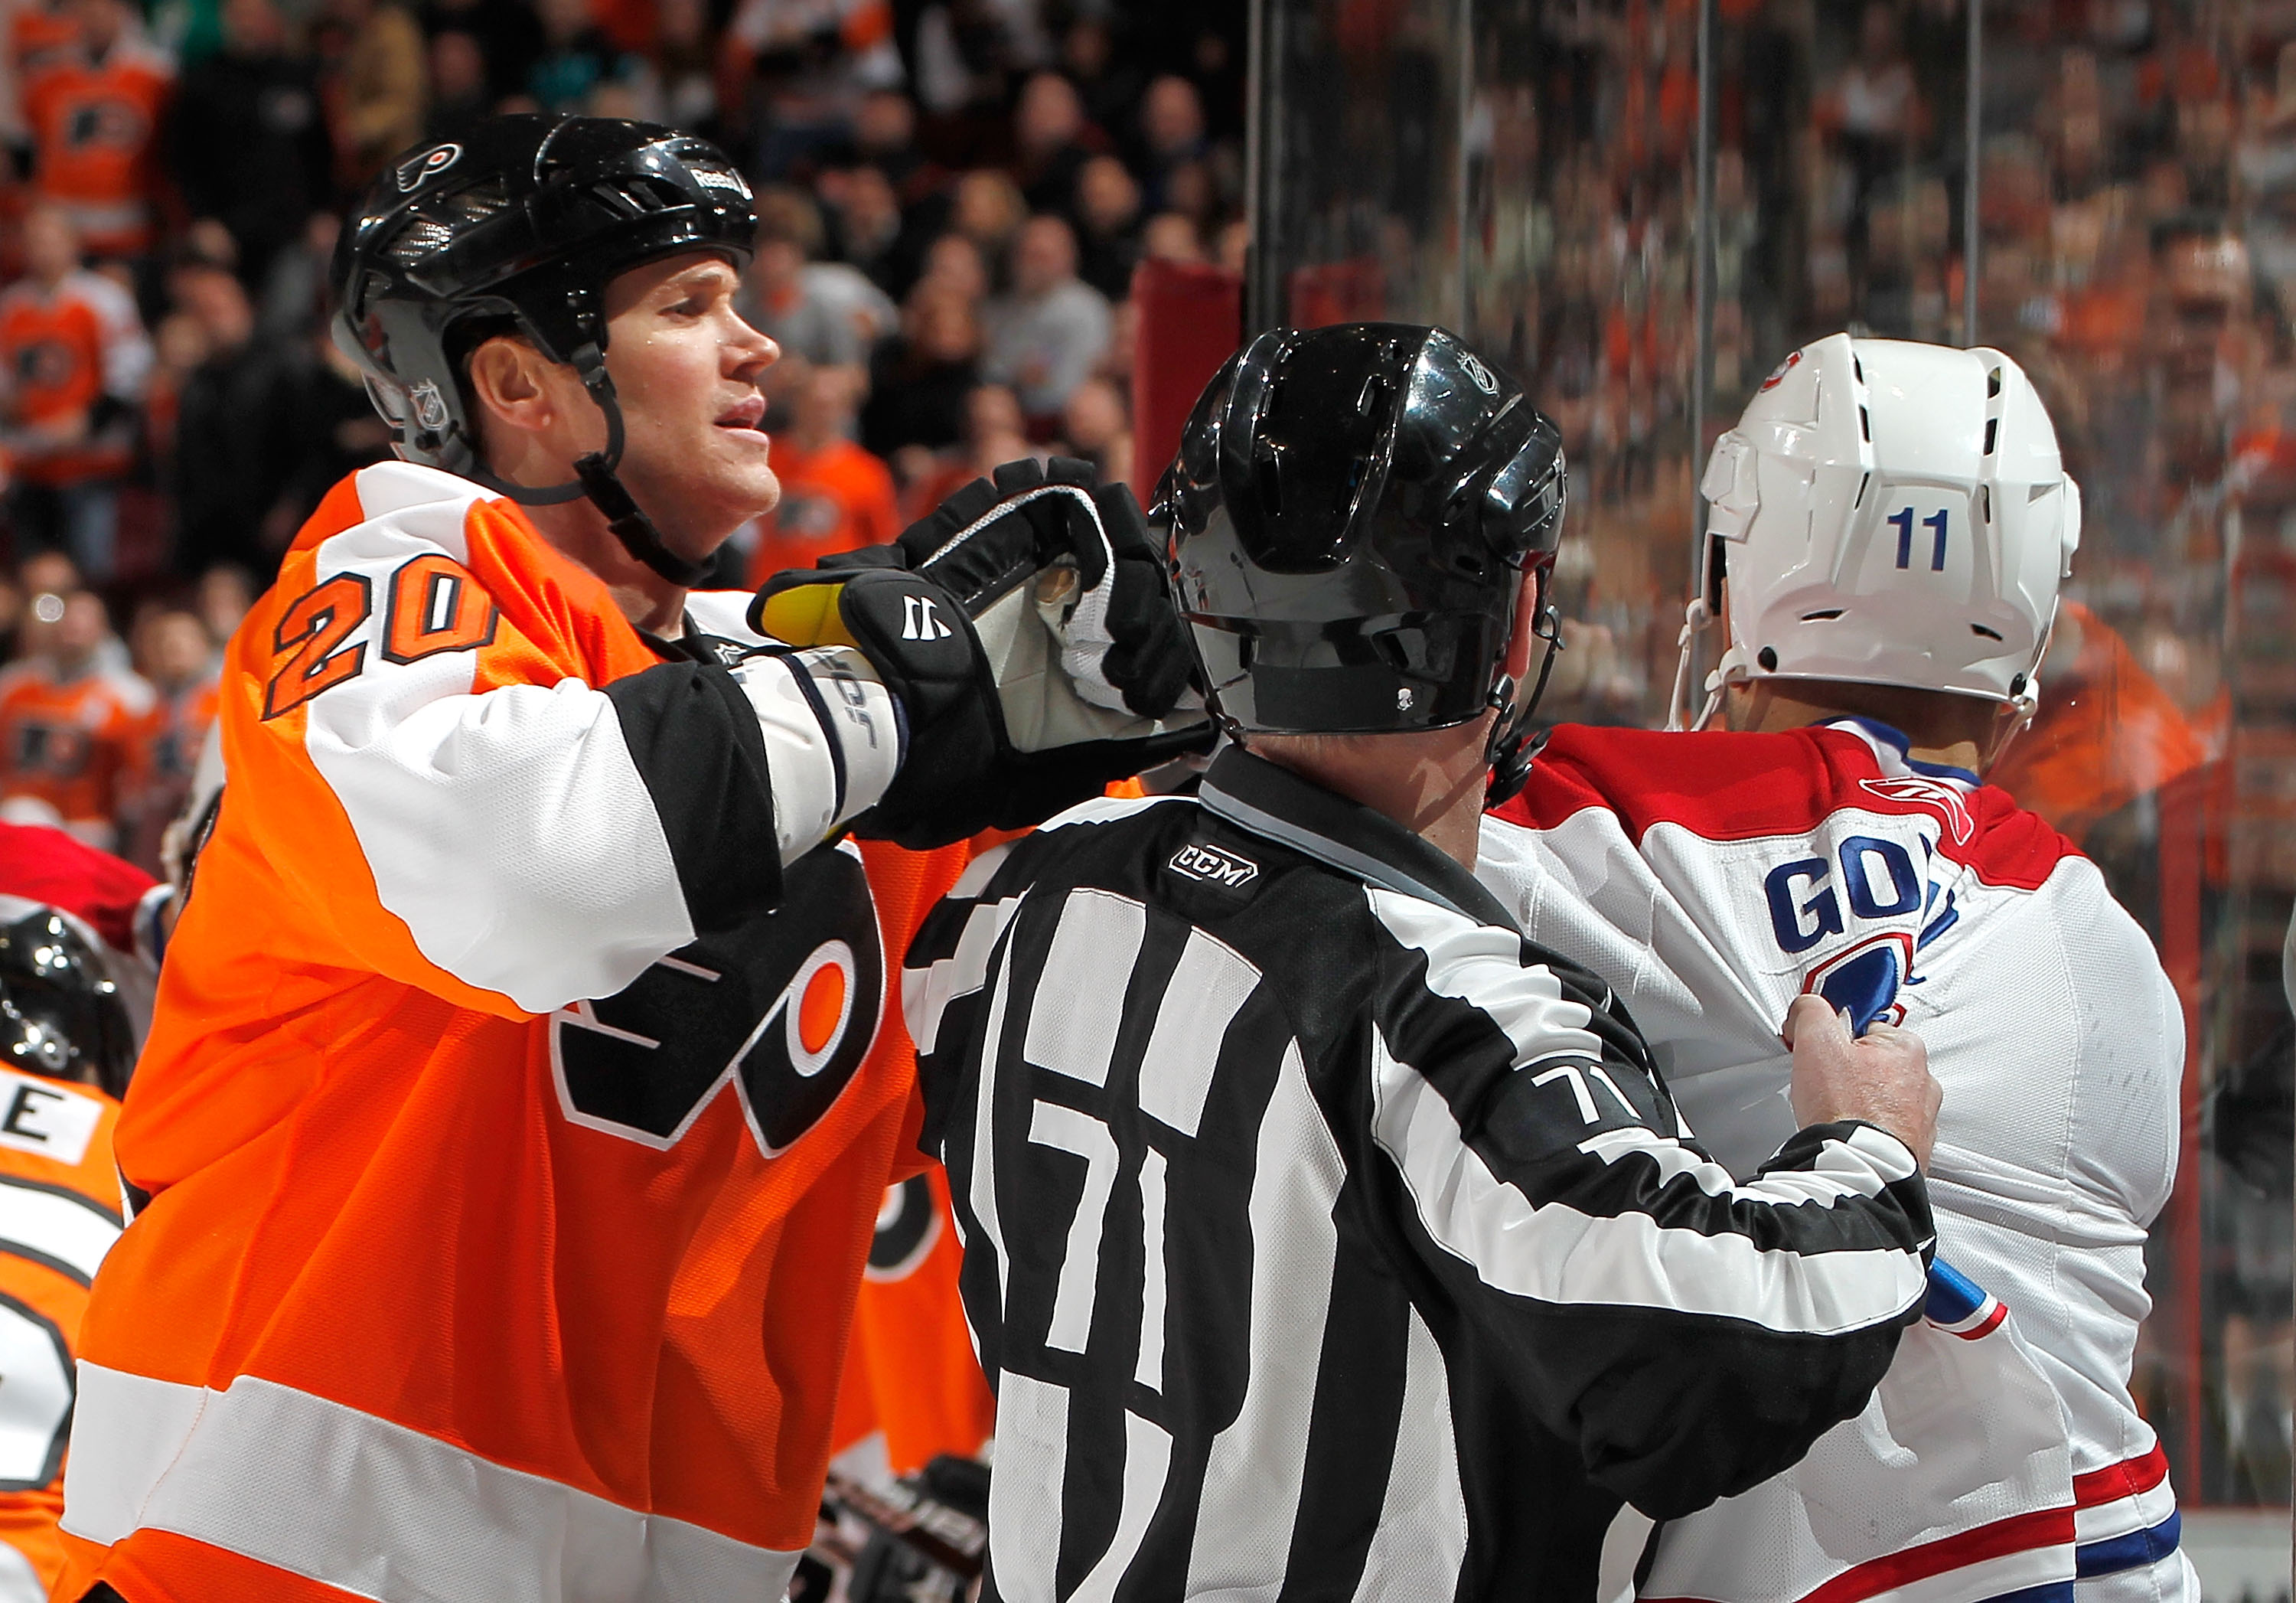 PHILADELPHIA, PA - JANUARY 25:  Scott Gomez #11 of the Montreal Canadiens is restrained as Chris Pronger #20 of the Philadelphia Flyers shoves at him during an NHL hockey game at the Wells Fargo Center on January 25, 2011 in Philadelphia, Pennsylvania.  (